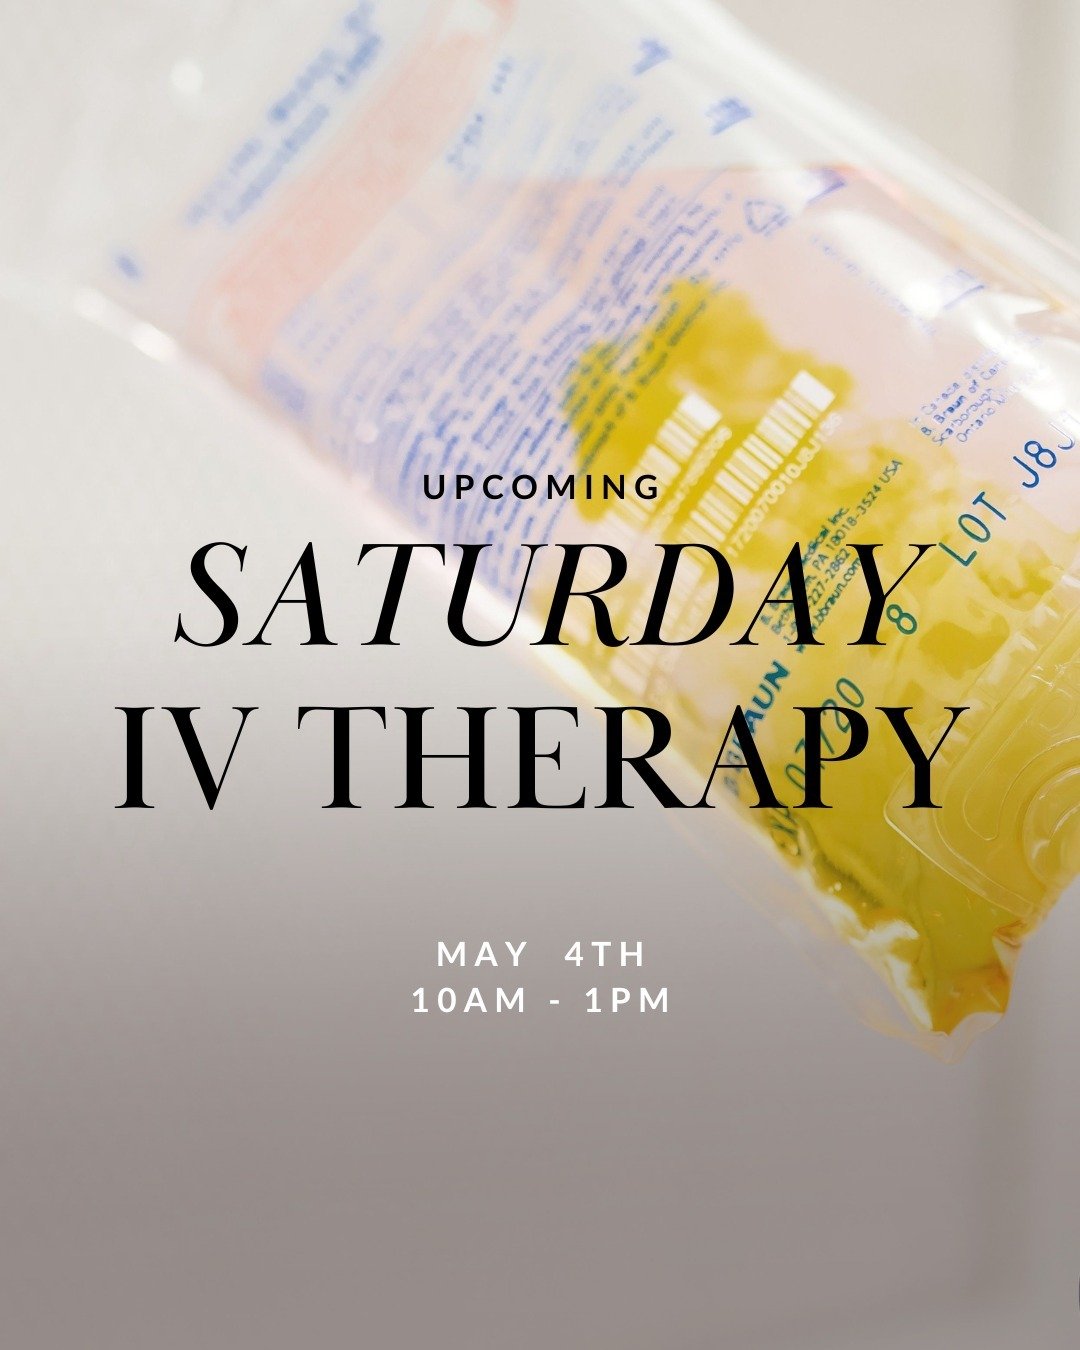 We have a couple IV Therapy spots left for Saturday ⁠
✨ May 4th ✨ from 10am - 1:00pm!⁠
⁠
We offer:⁠
- vitamin drips⁠
- pre and post surgery recovery⁠
- high dose vitamin C⁠
- athletic recovery⁠
- hangover recovery⁠
- nebulized glutathione to support 